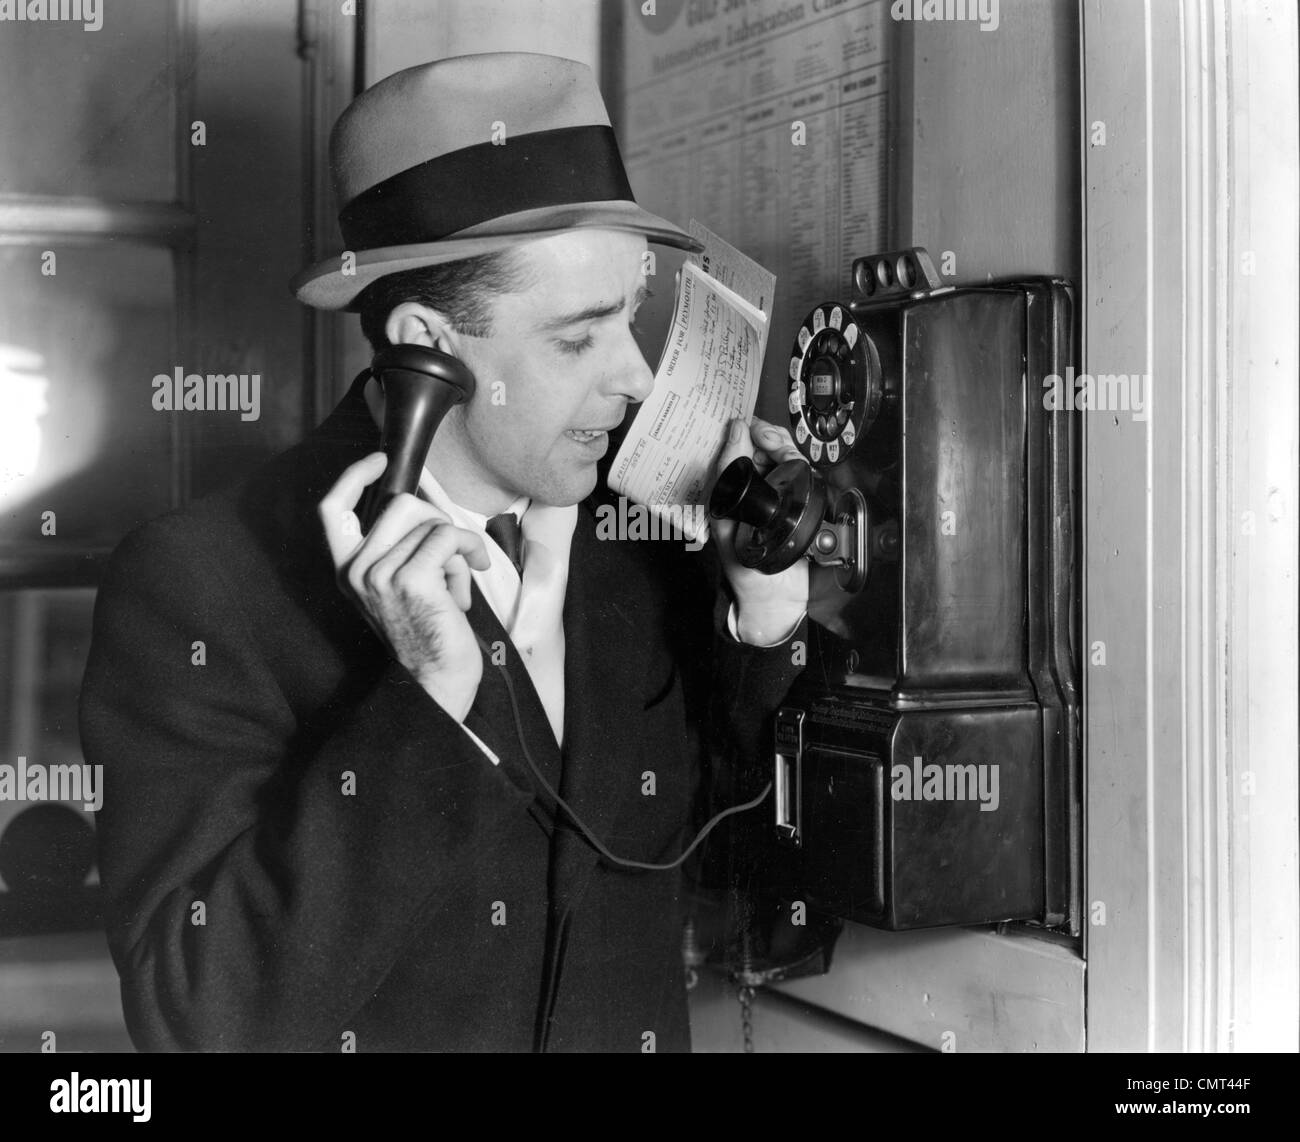 1930s BUSINESSMAN IN HAT AND SUIT TALKING ON PUBLIC PAY TELEPHONE SALES MAN CALLING IN ORDER Stock Photo